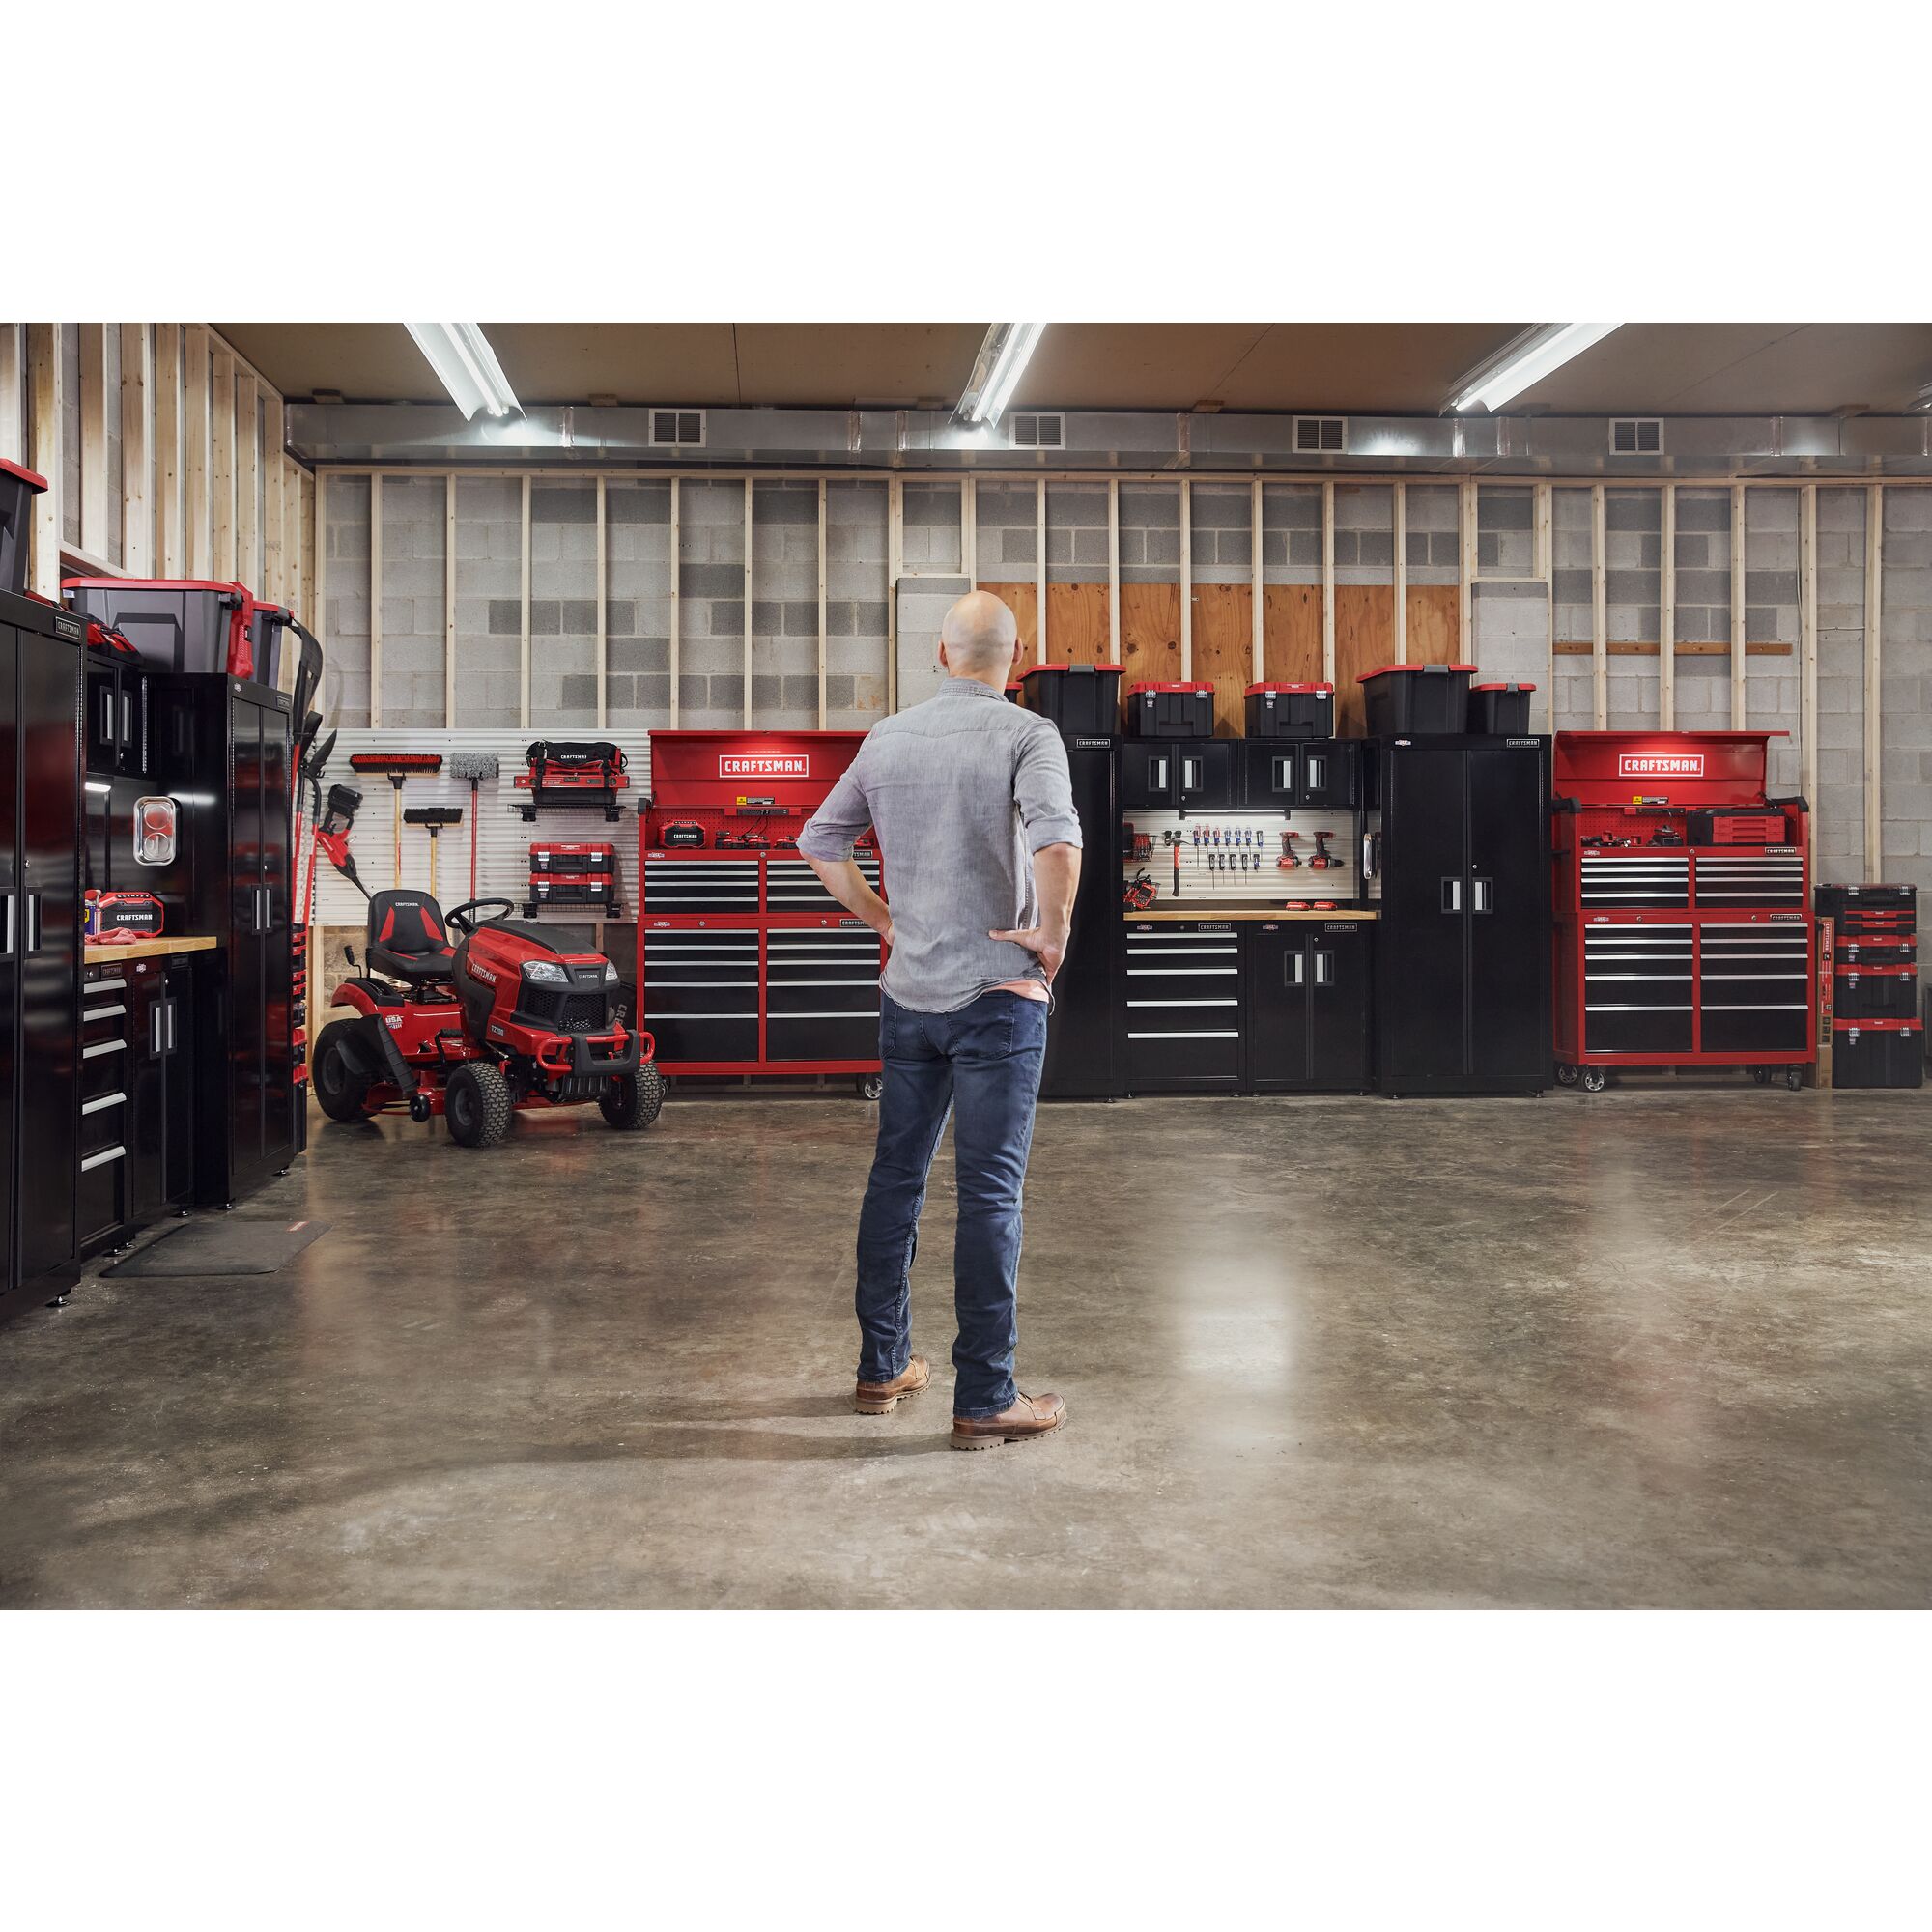 Man handing trimmer on versatrack with garage filled with power tools, storage, outdoor products